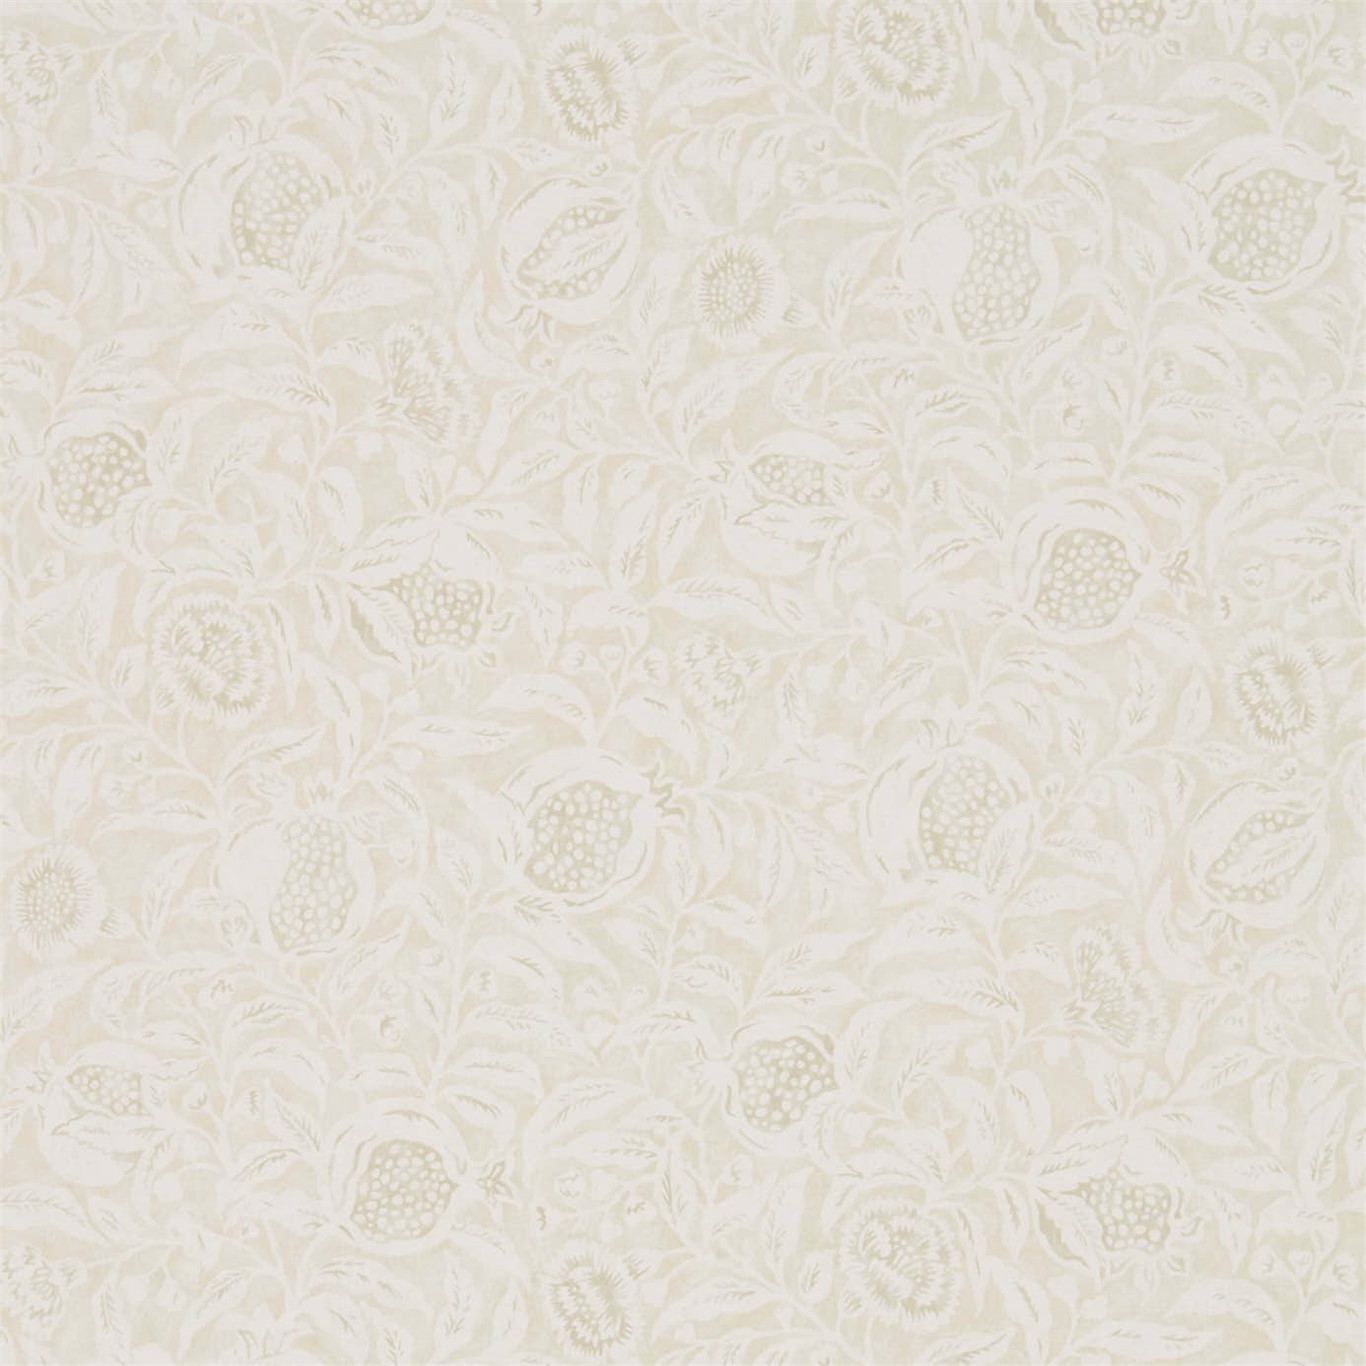 a white wallpaper with a floral design on it